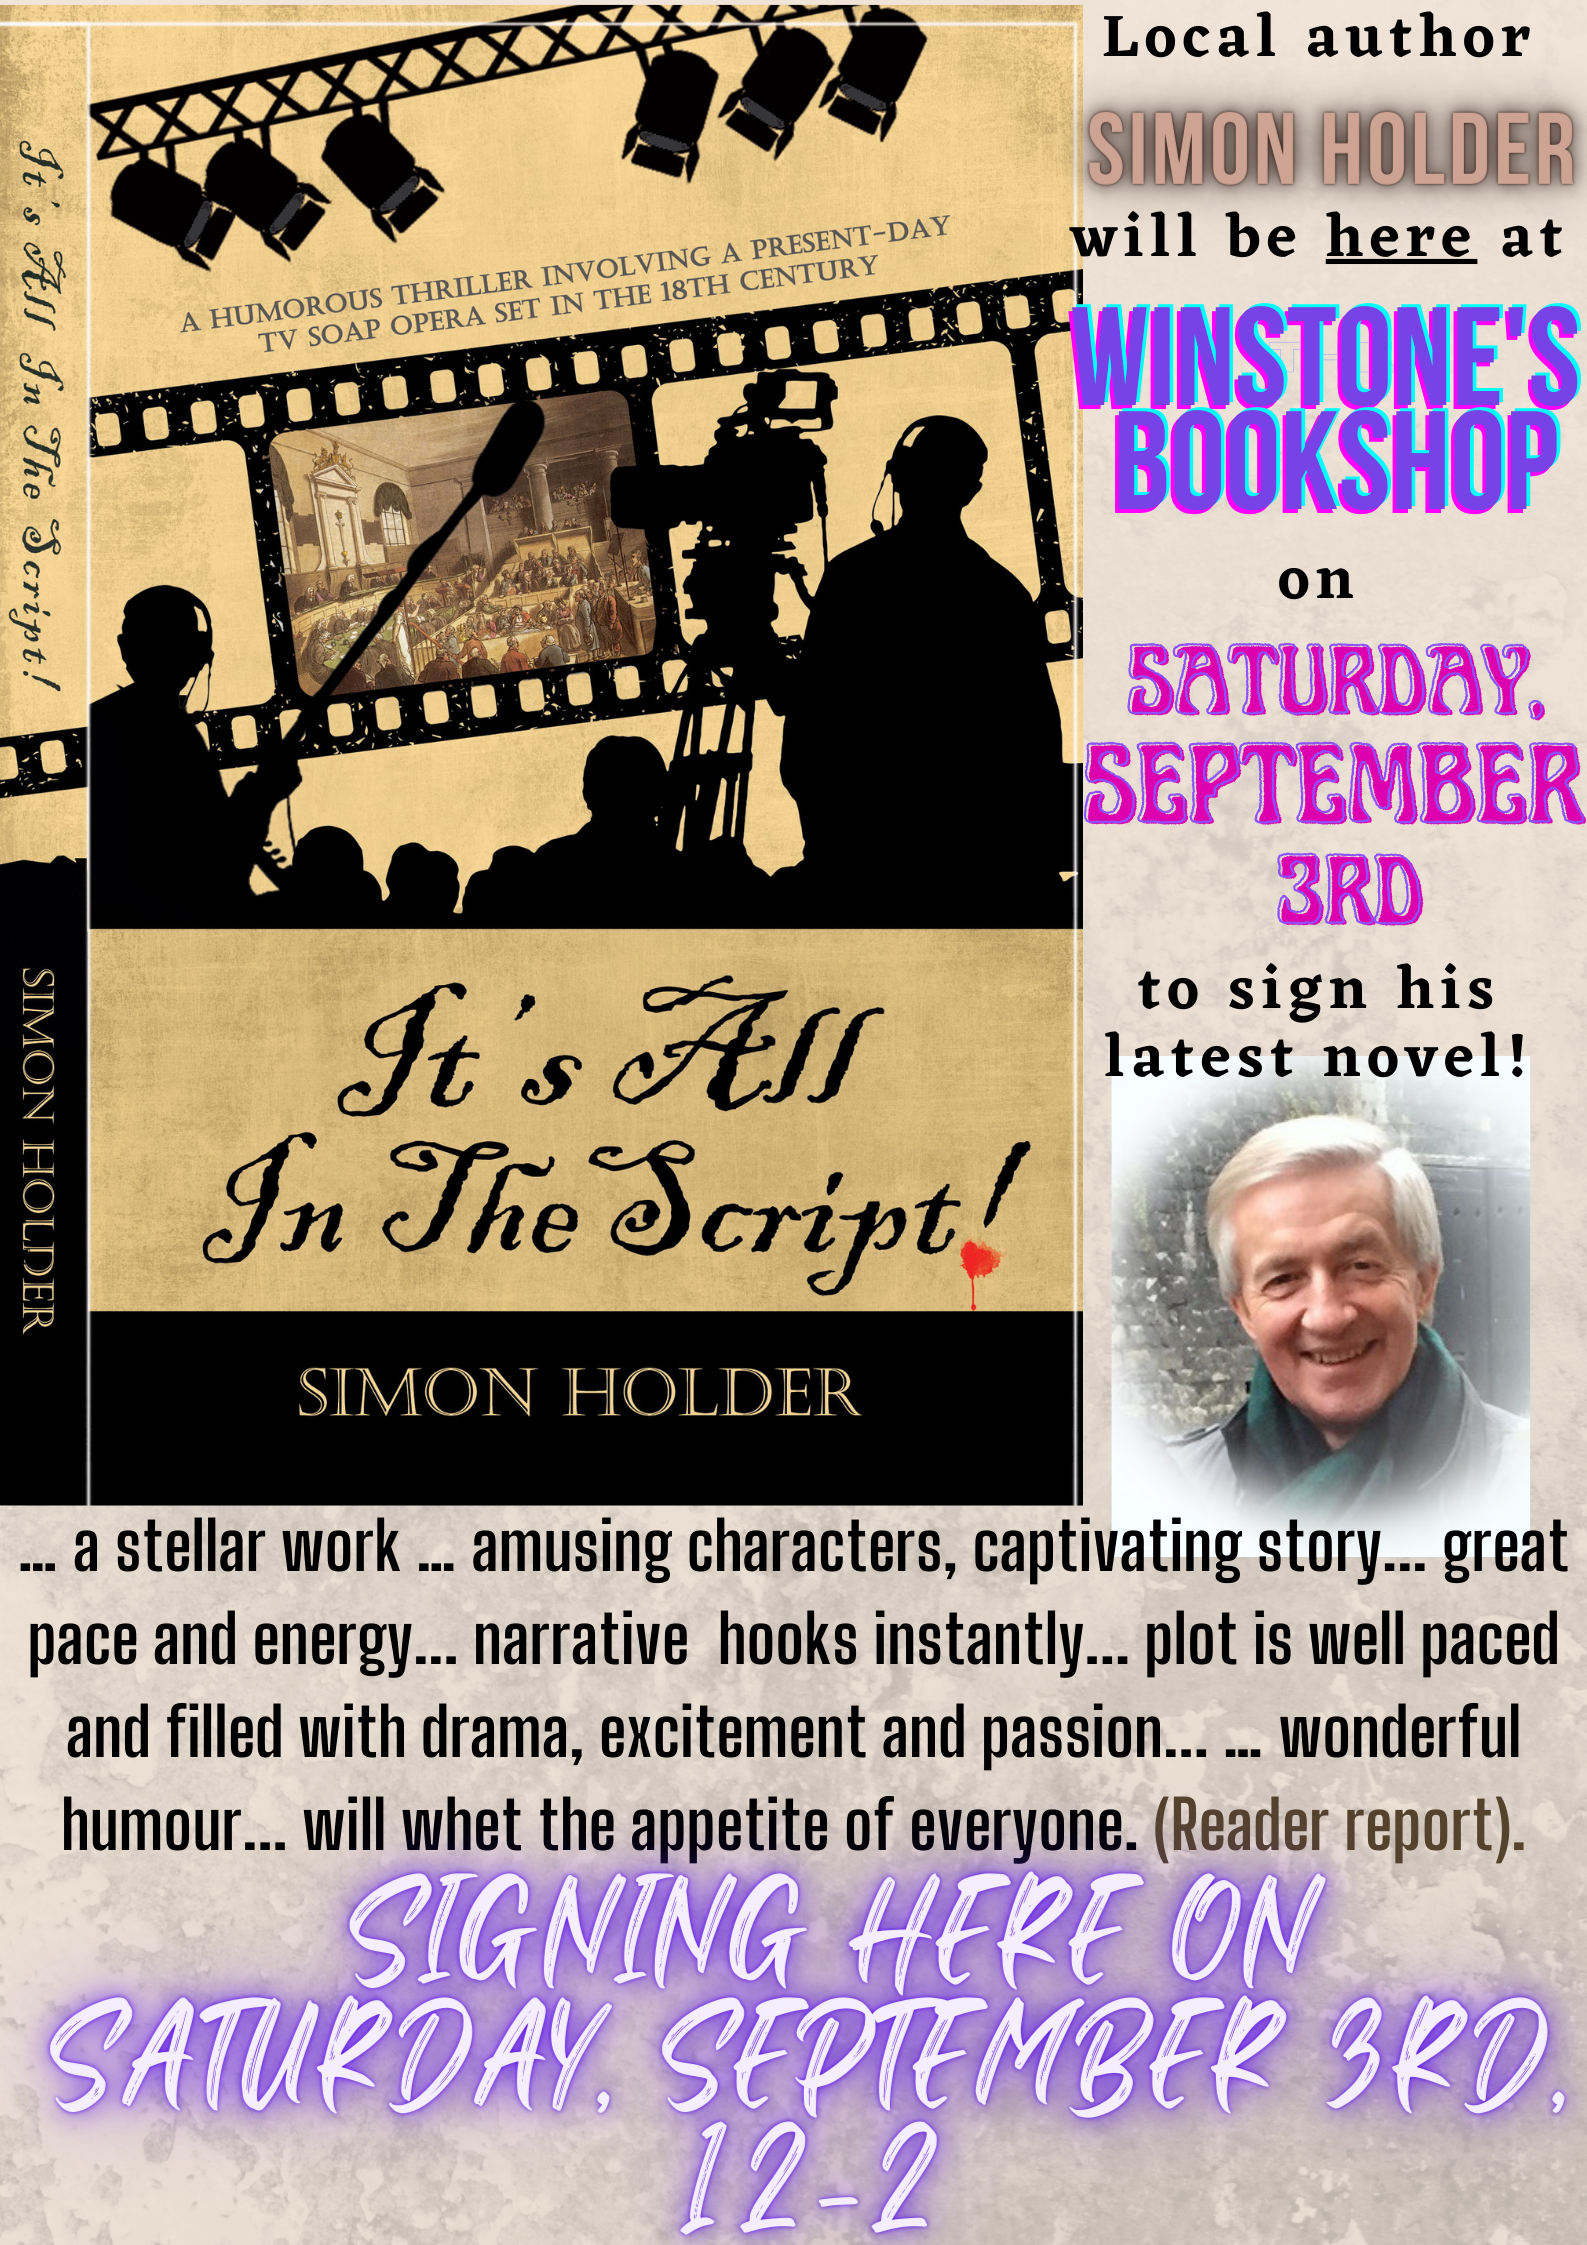 Local author Simon Holder - book signing session 3/9/22